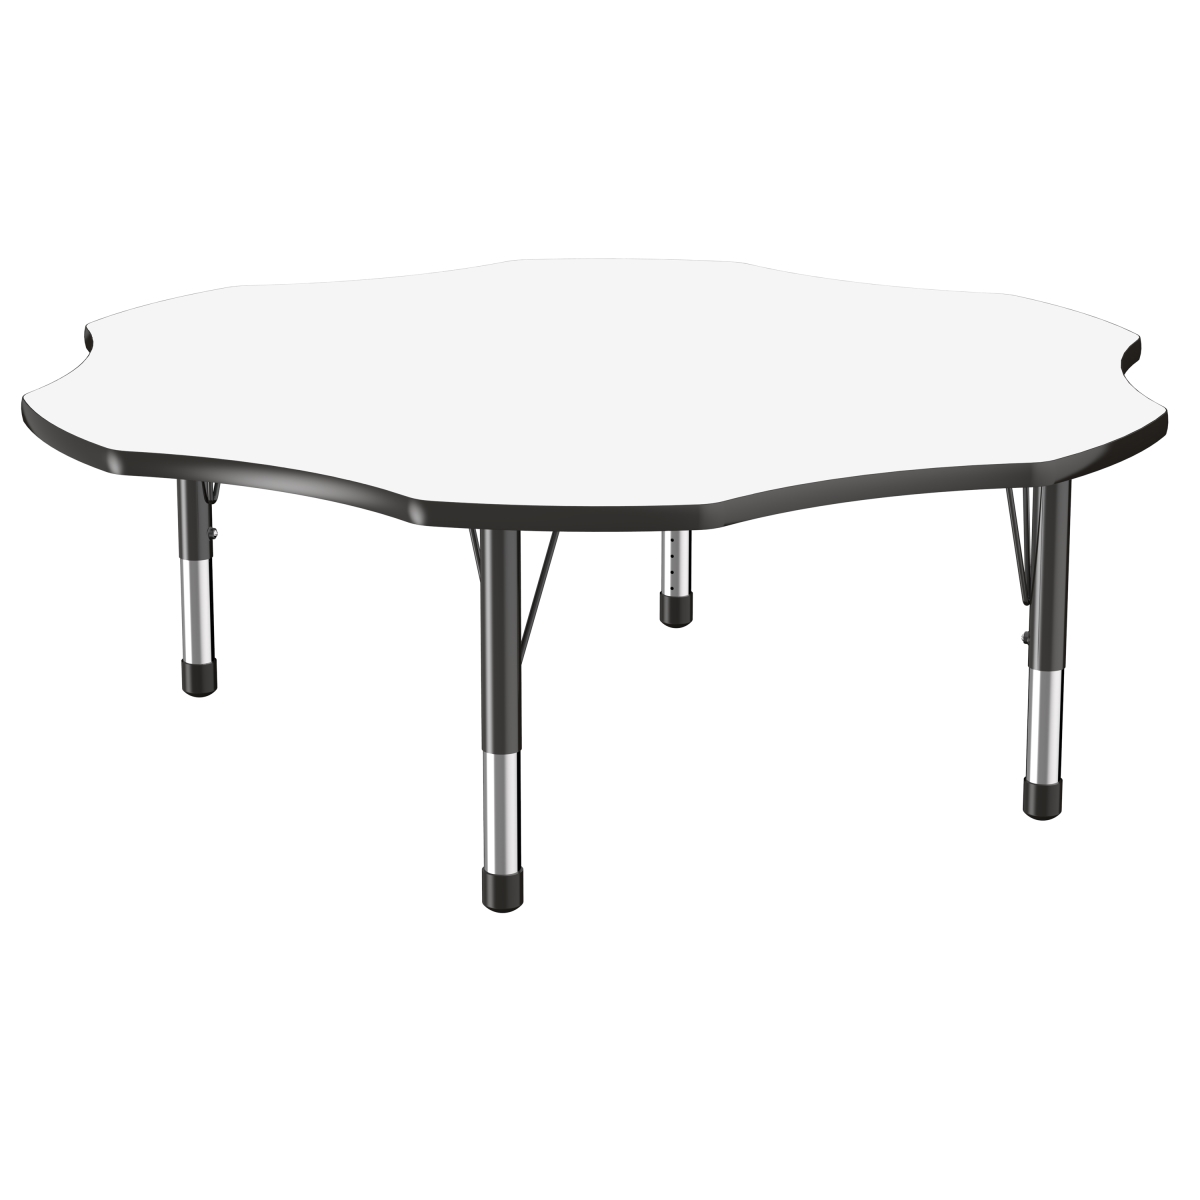 10243-debk 60 In. Flower Dry-erase Adjustable Activity Table With Chunky Leg - Black